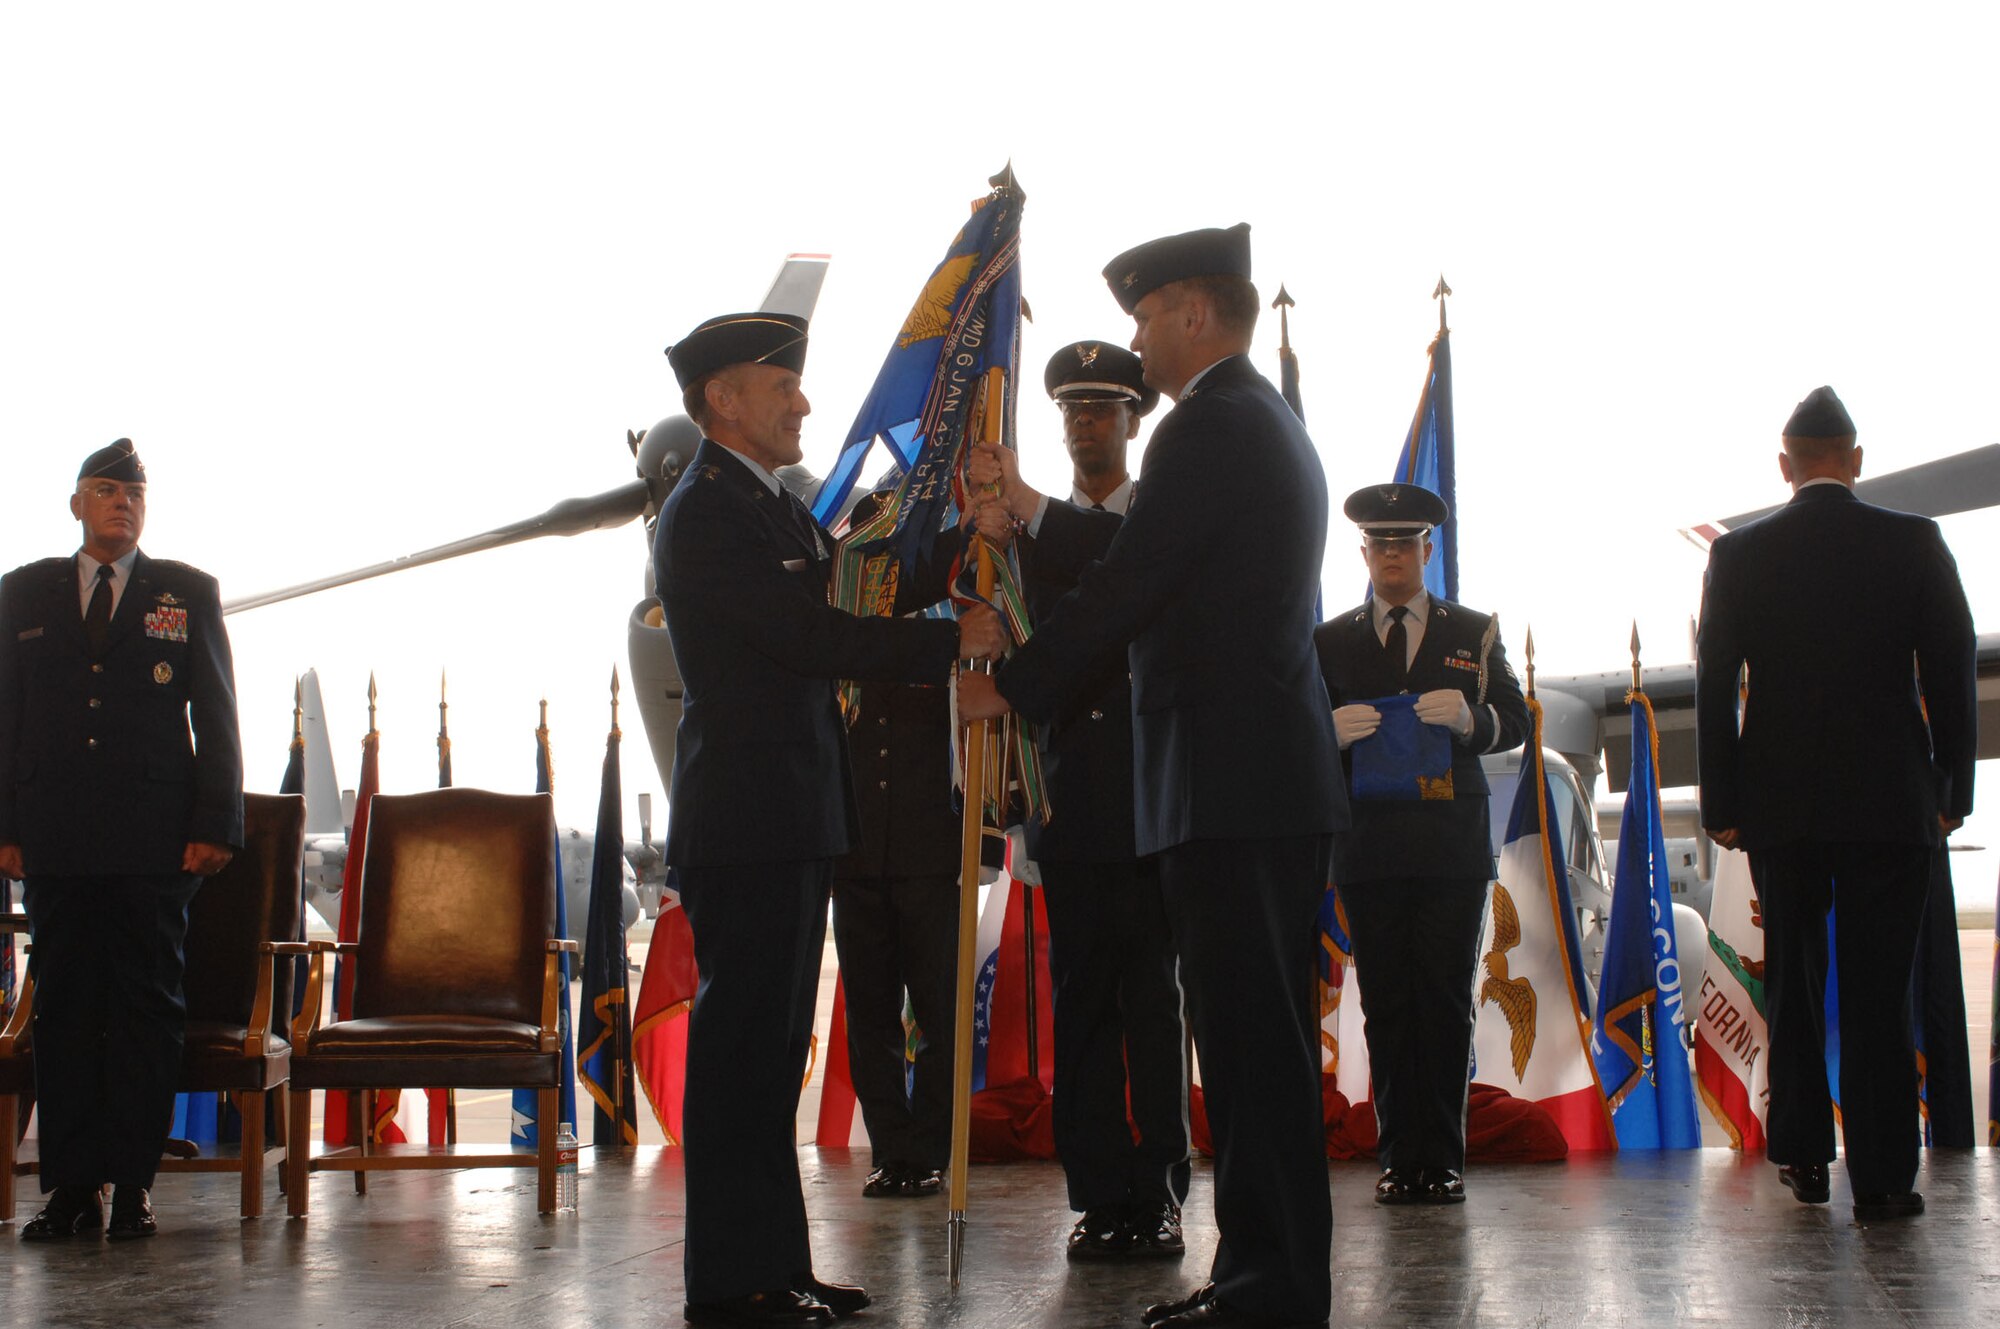 CANNON AIR FORCE BASE, N.M. -- Lt. Gen. Norman R. Seip, 12th Air Force commander, (left) accepts the guidon from Col. Scott West, former commander of the 27th Fighter Wing, (right) who relinquished command of the 27th Fighter Wing in a change-of-command ceremony Oct. 1. The ceremony inactivated the 27th Fighter Wing and was redesignated the 27th Special Operations Wing. (U.S. Air Force photo by Airman 1st Class Evelyn Chavez)